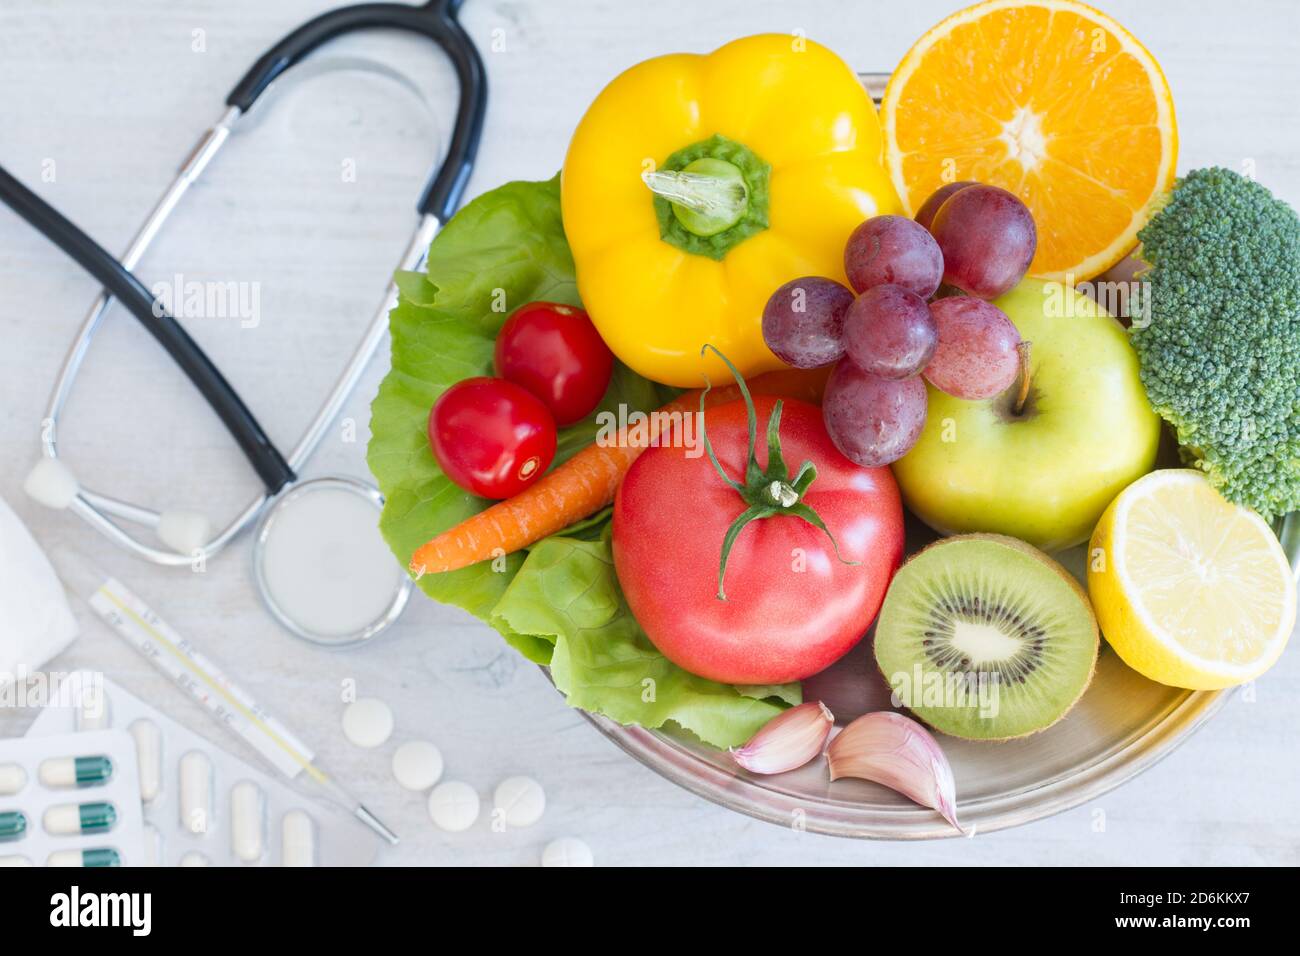 Fruits and vegetables platter, medications in background. Healthy diet alternative Stock Photo